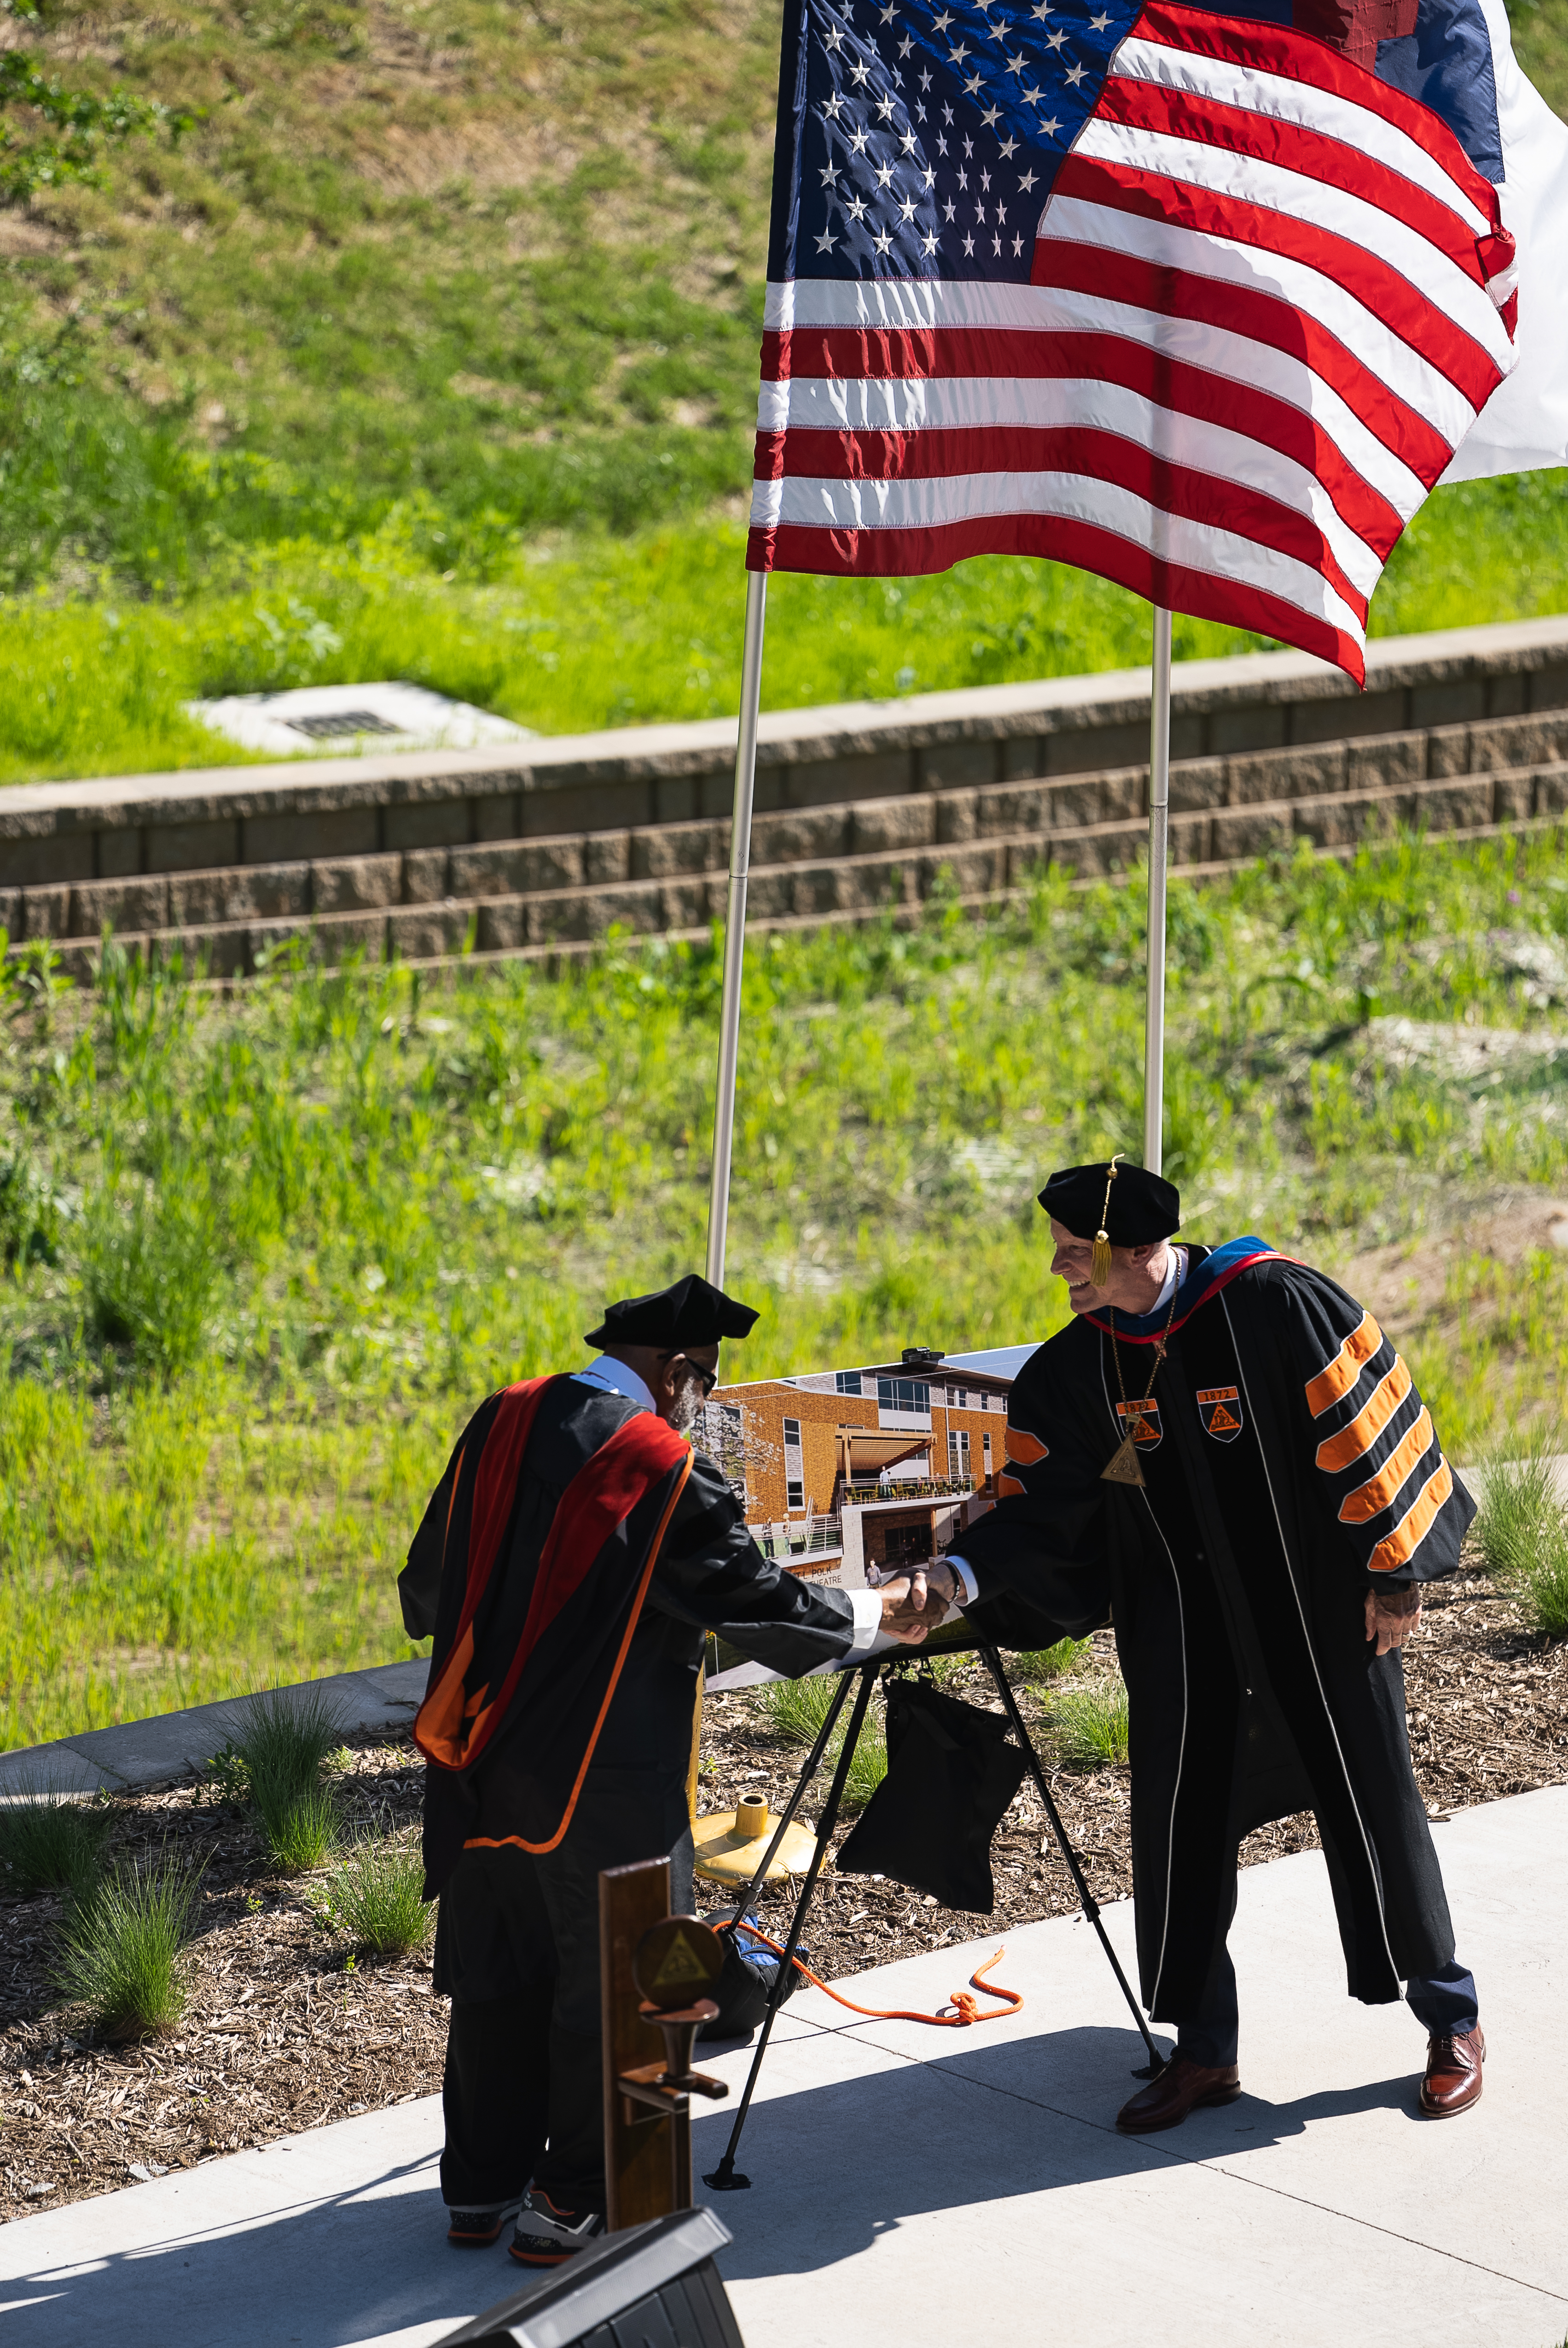 Two men in black academic robes shake hands in front of a poster showing a building. Behind them flies an American flag, with green plant growth in the background split by a brick retaining wall.